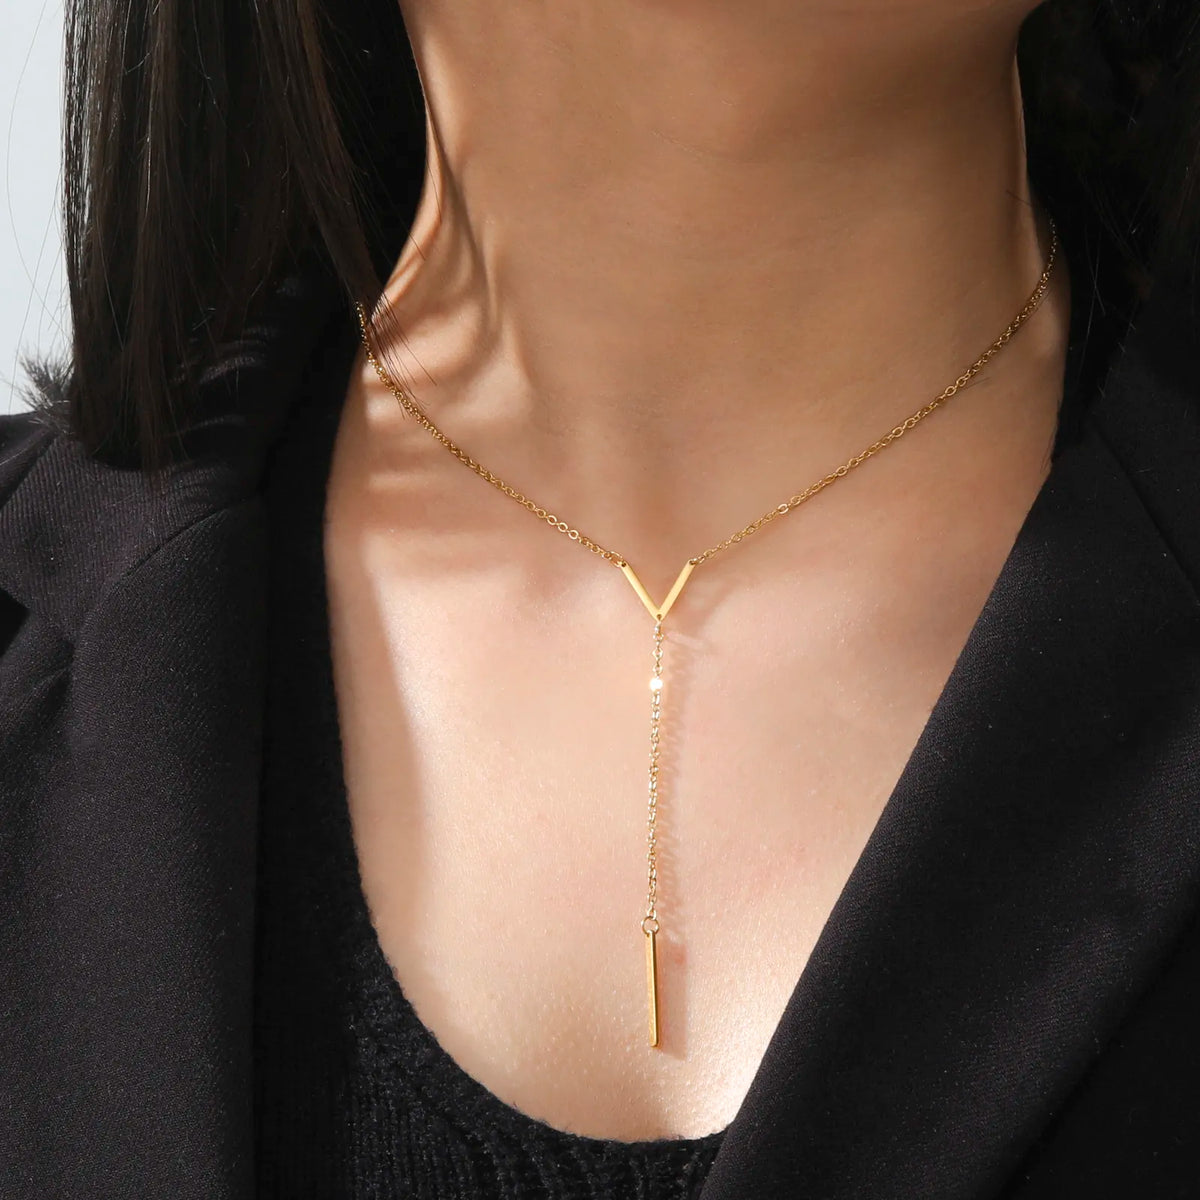 Gold Stainless Steel V-Shaped Necklace for Women and Girls